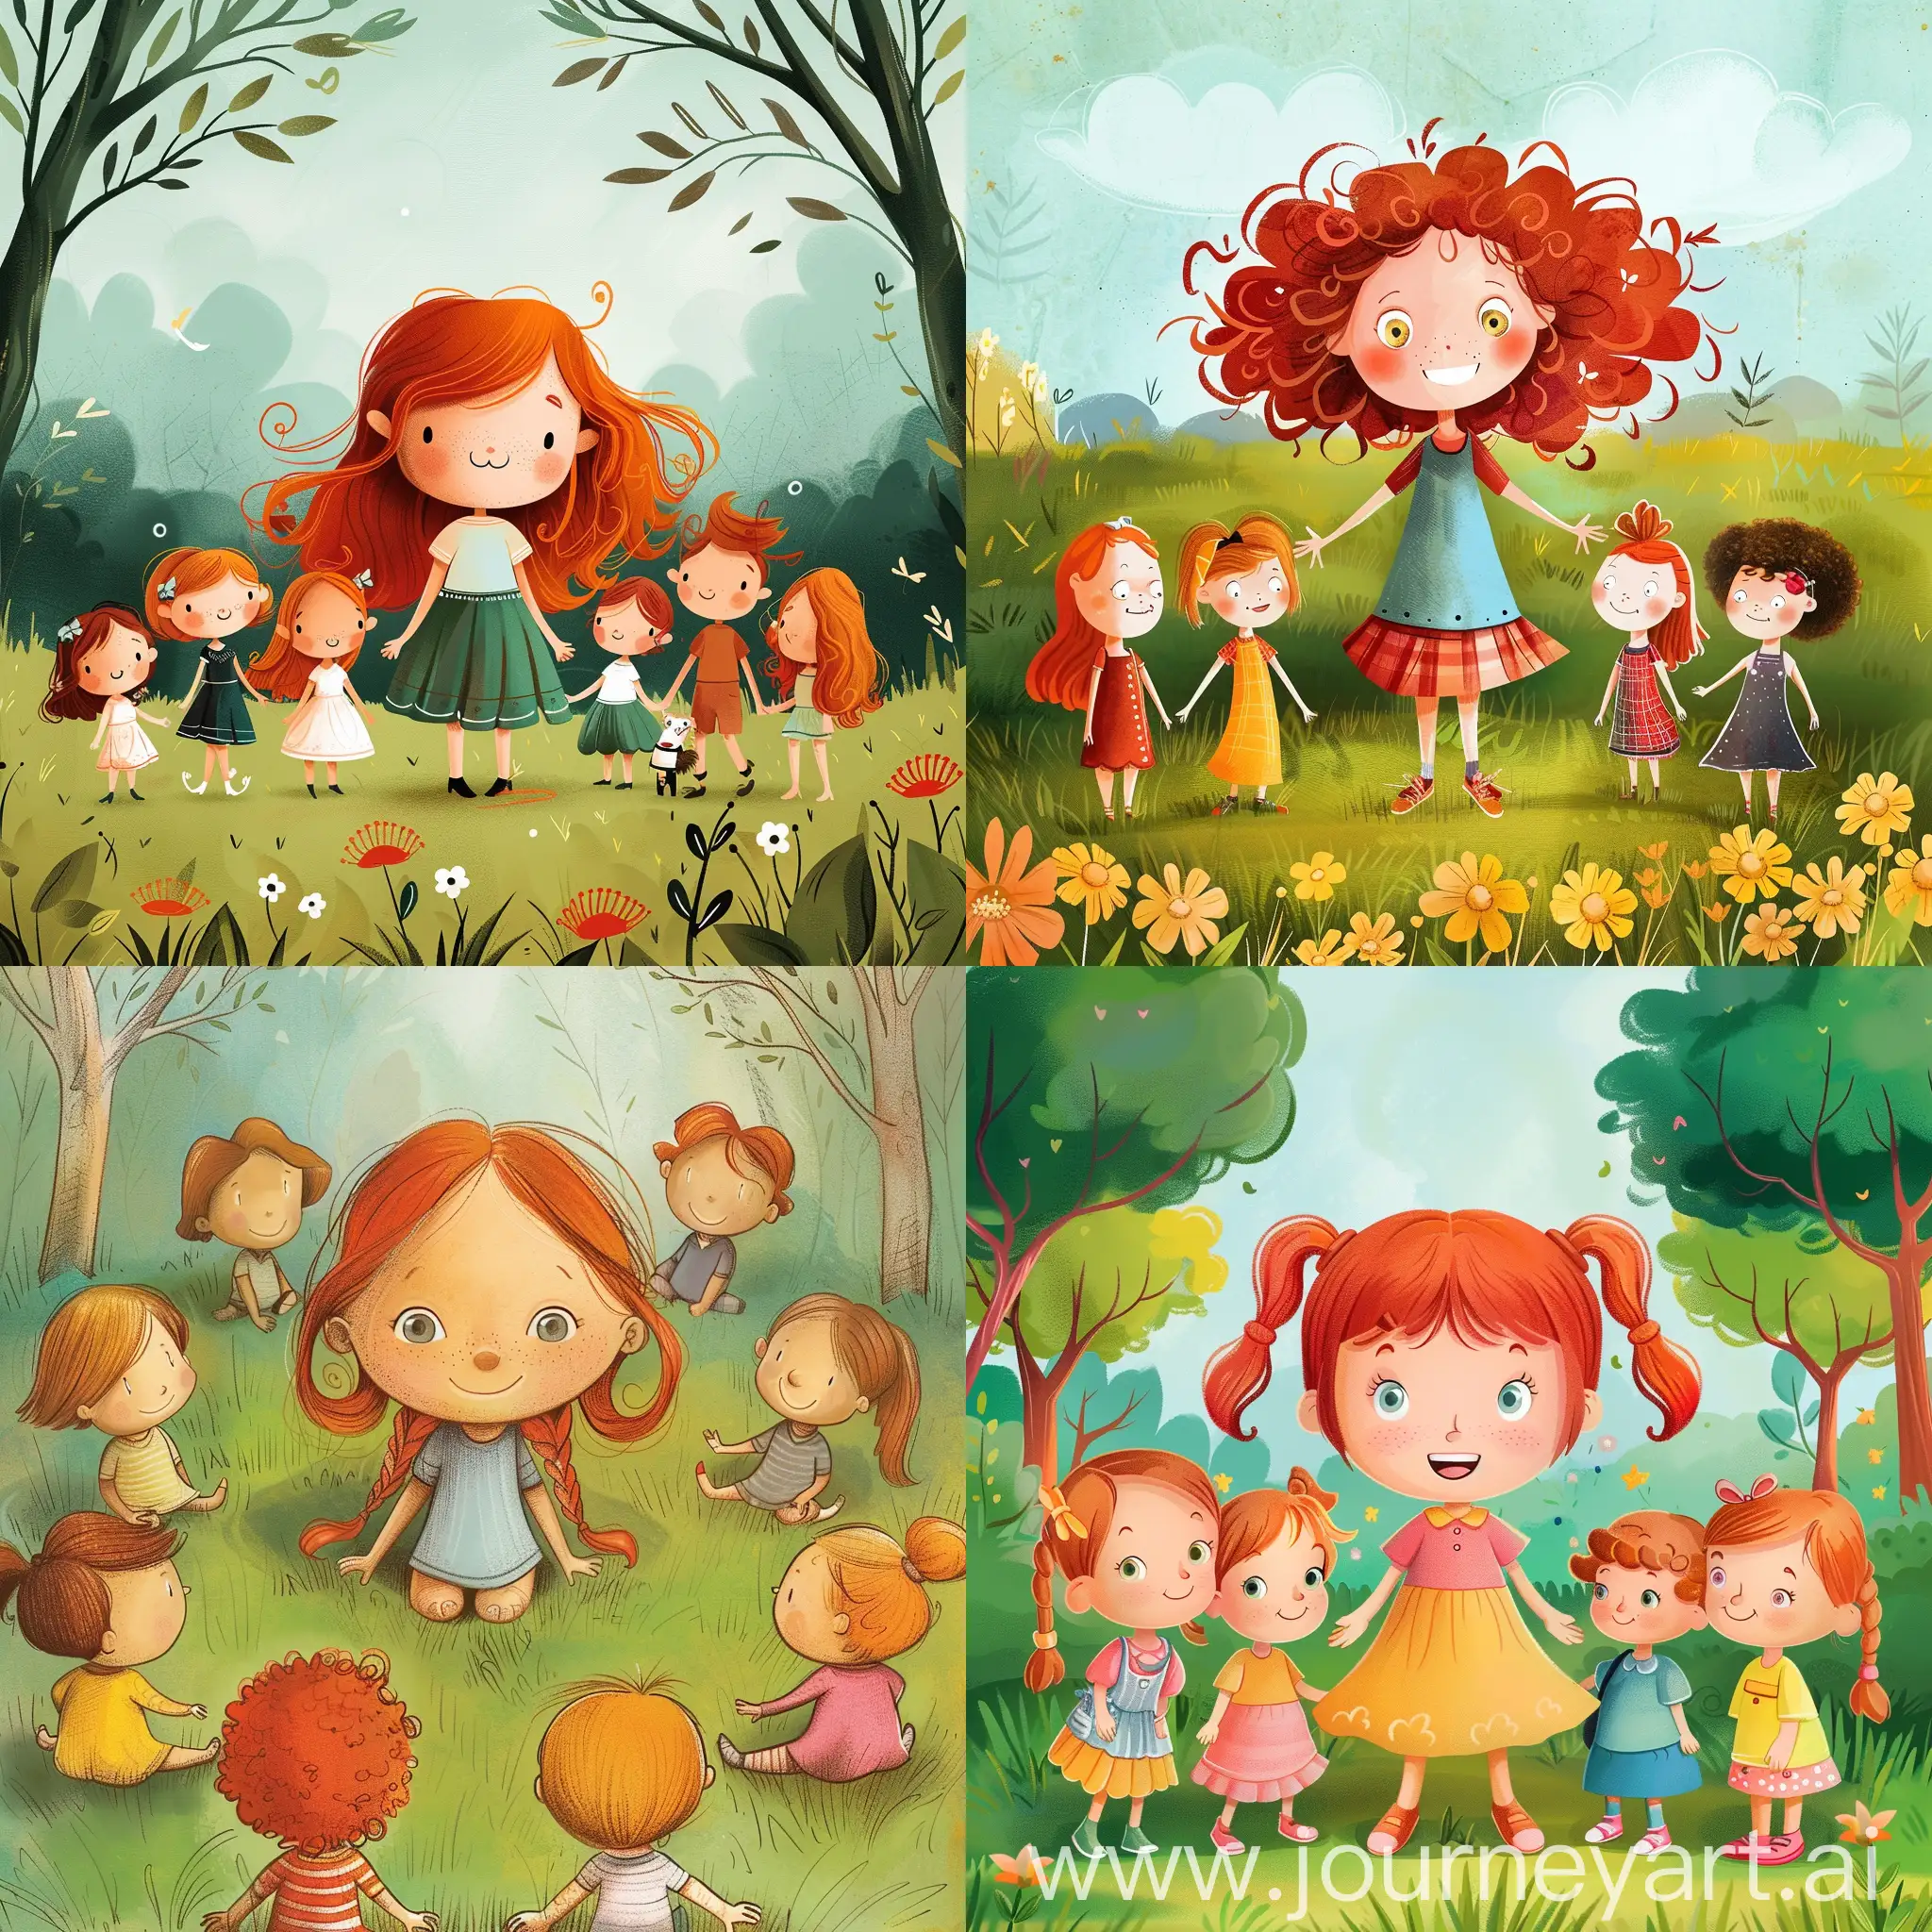 Cartoon-RedHaired-Girl-and-Friends-Enjoying-Park-Fun